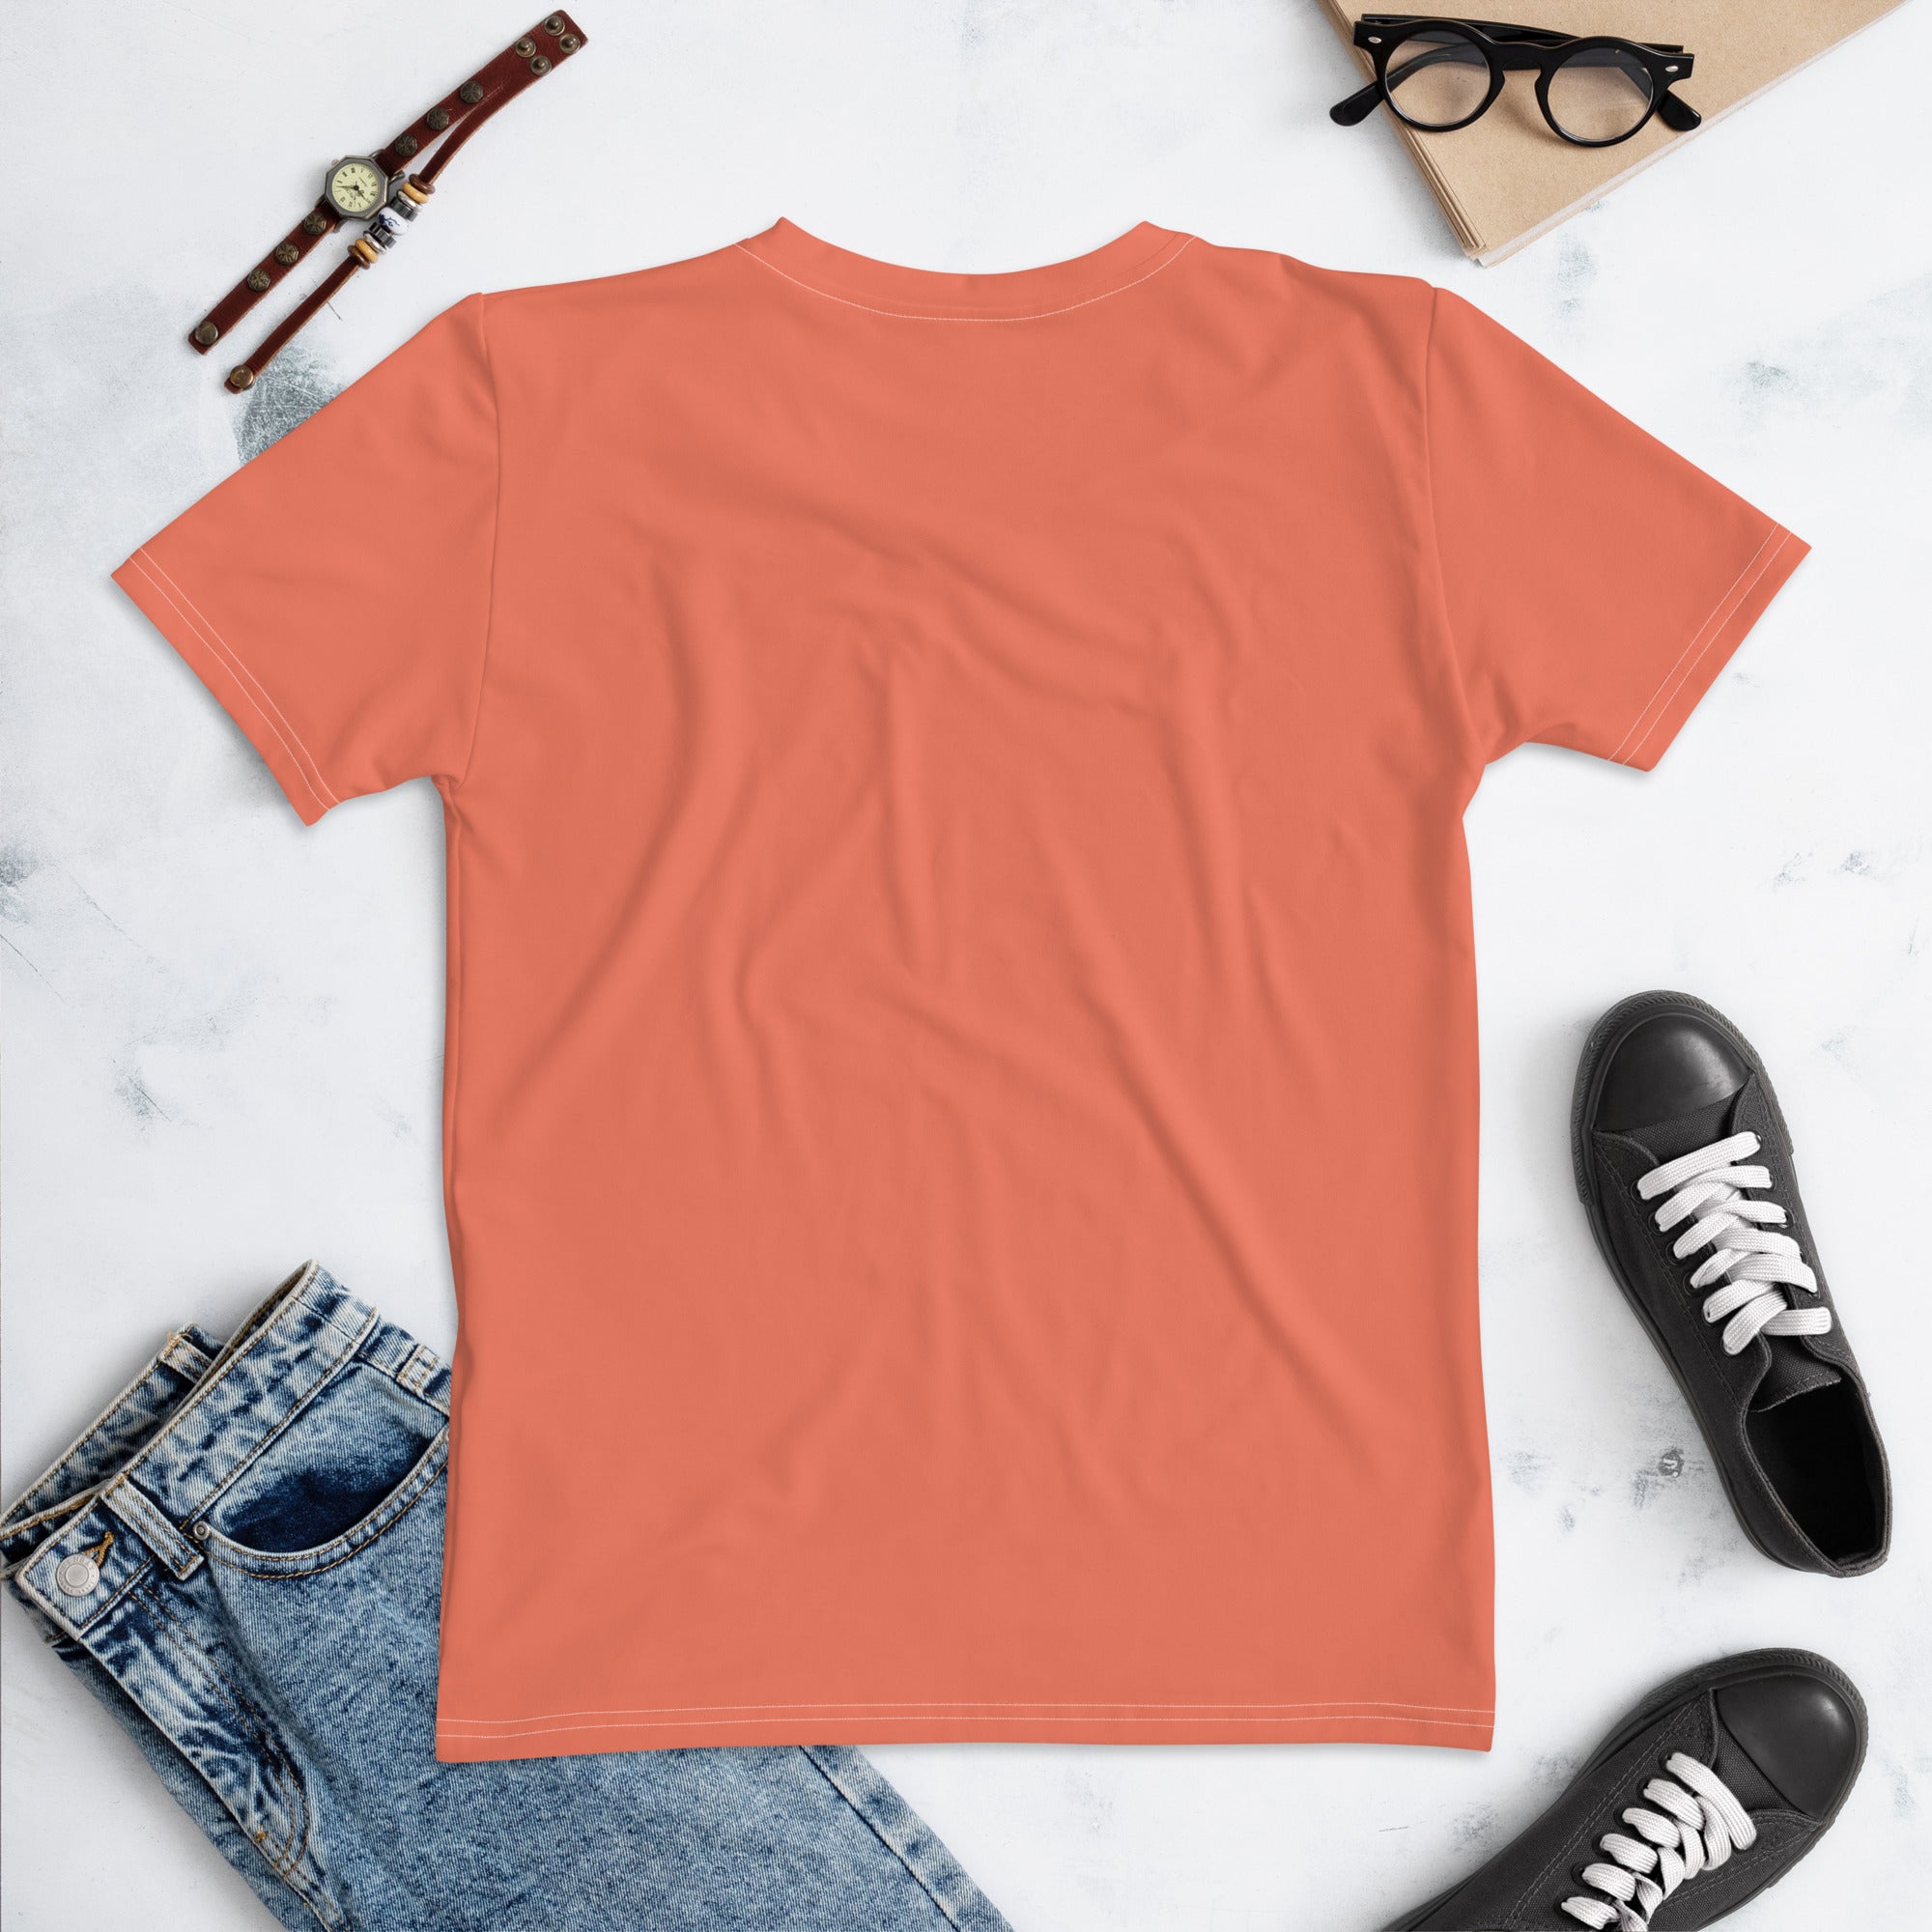 Perfectly Peach Tee: Ultimate Combination of Style & Comfort